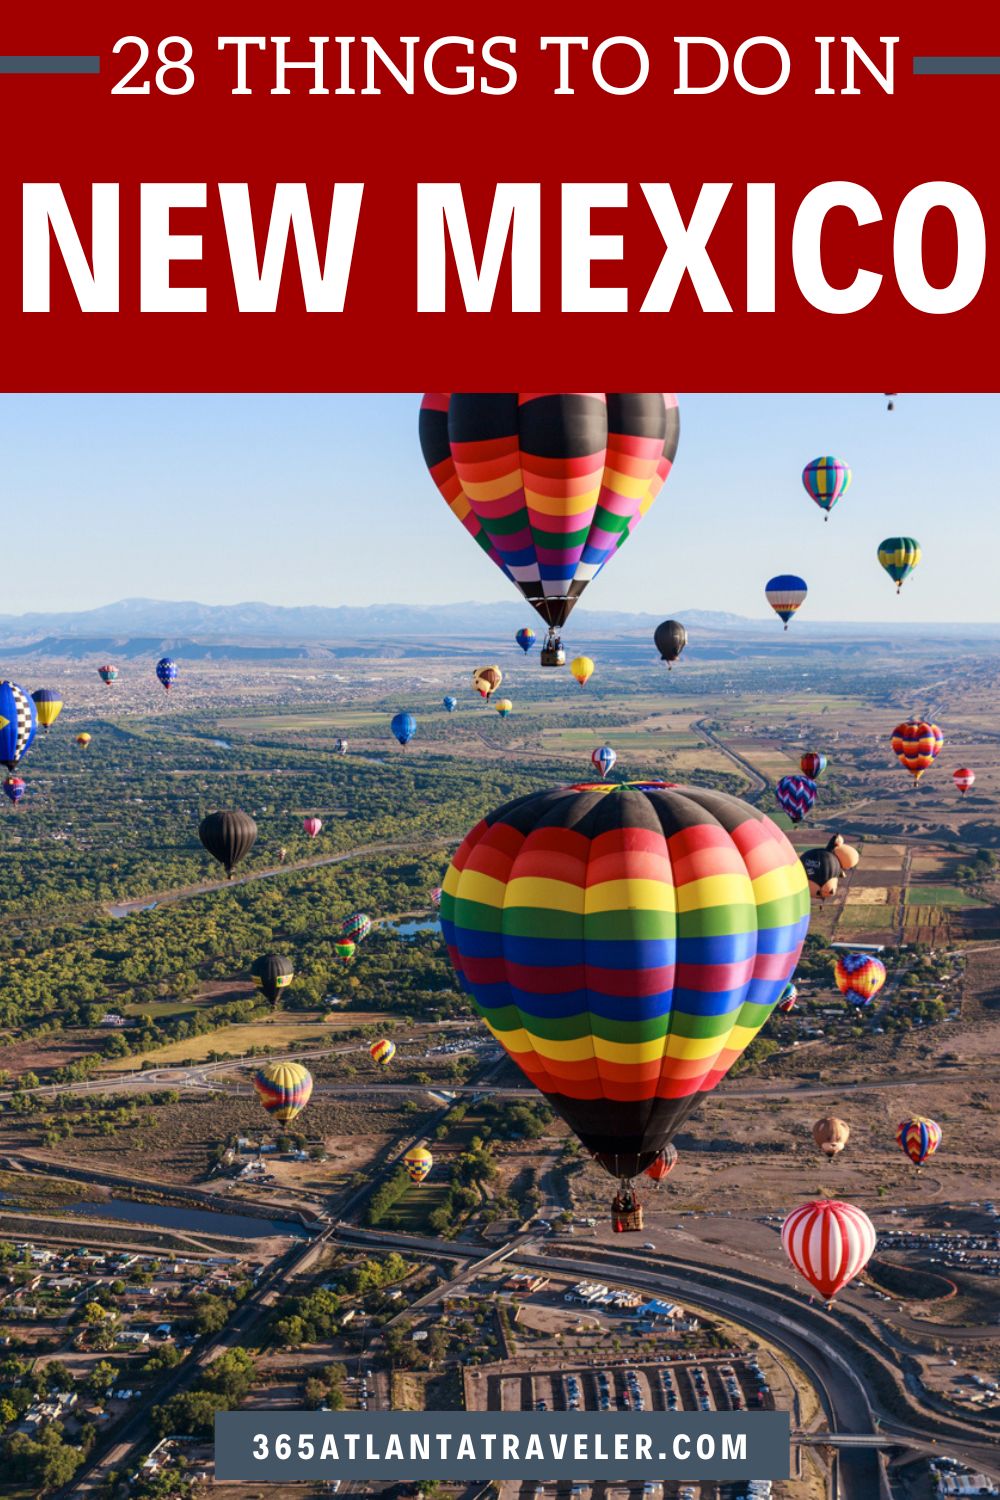 28 THINGS TO DO IN NEW MEXICO EVERYONE WILL LOVE